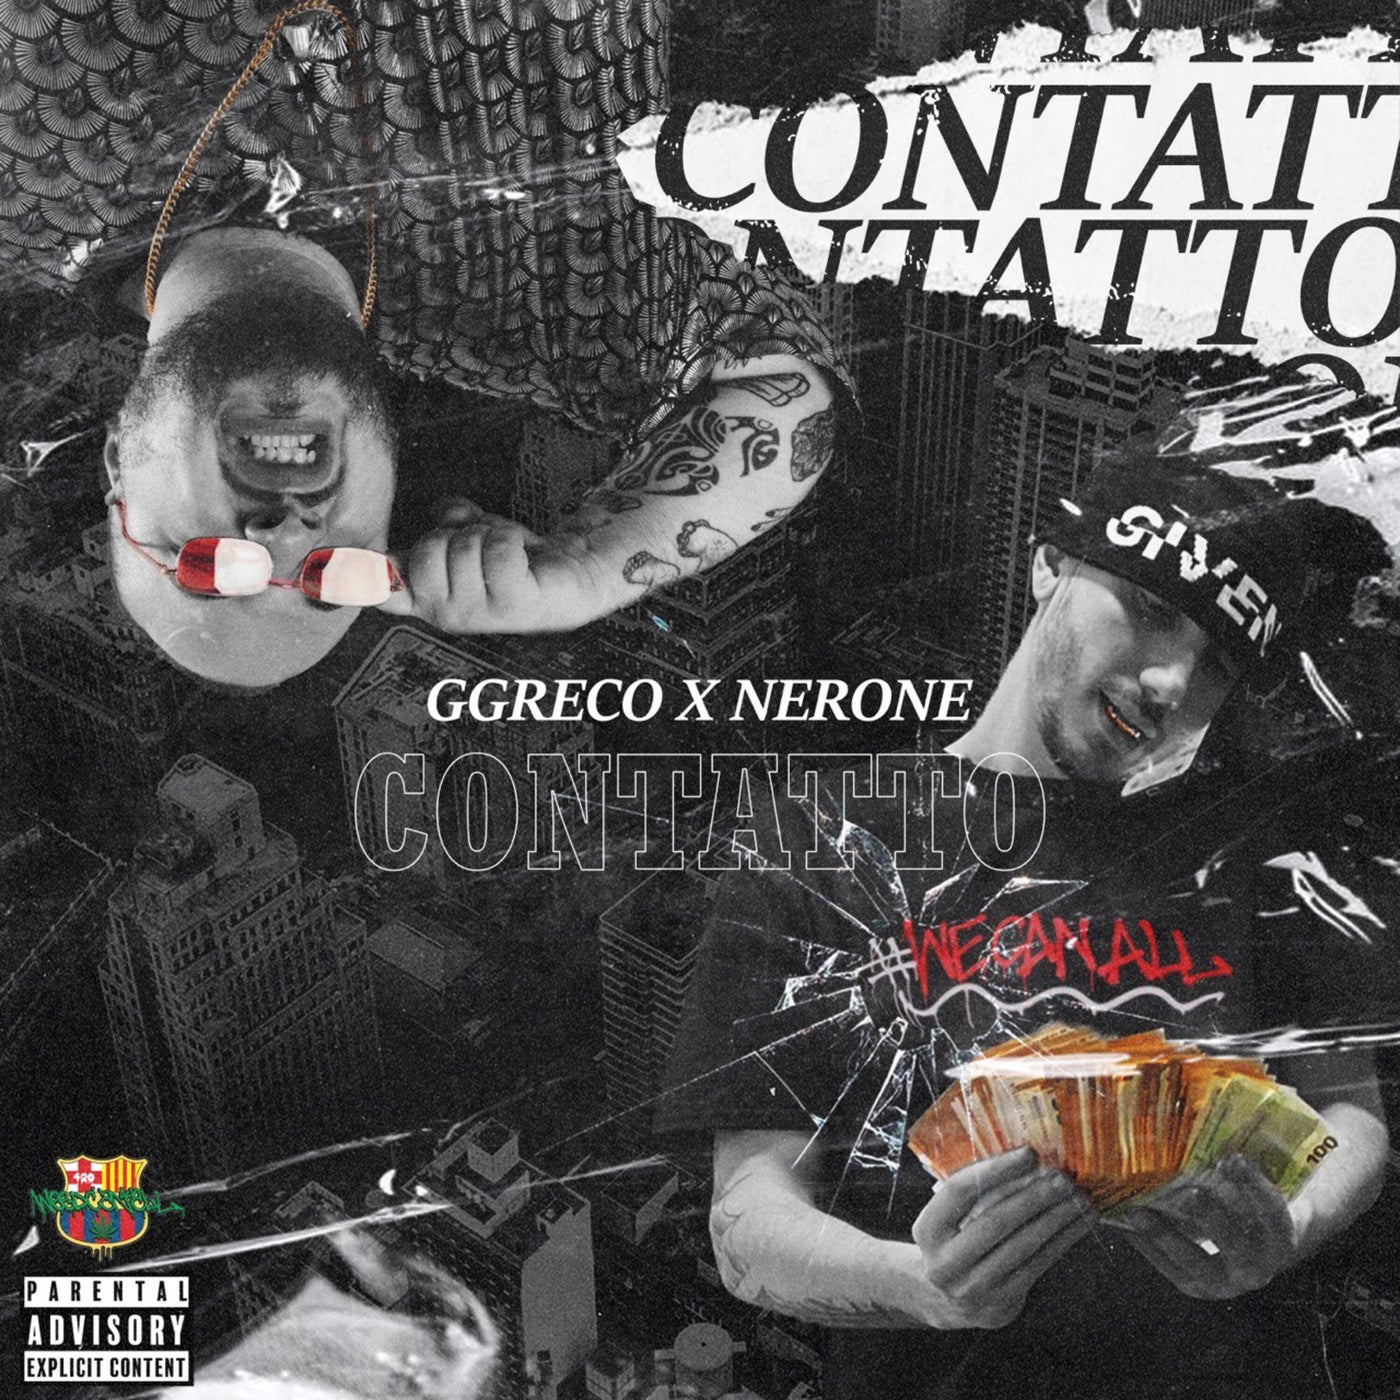 CONTATTO by Nerone and Ggreco on Beatsource